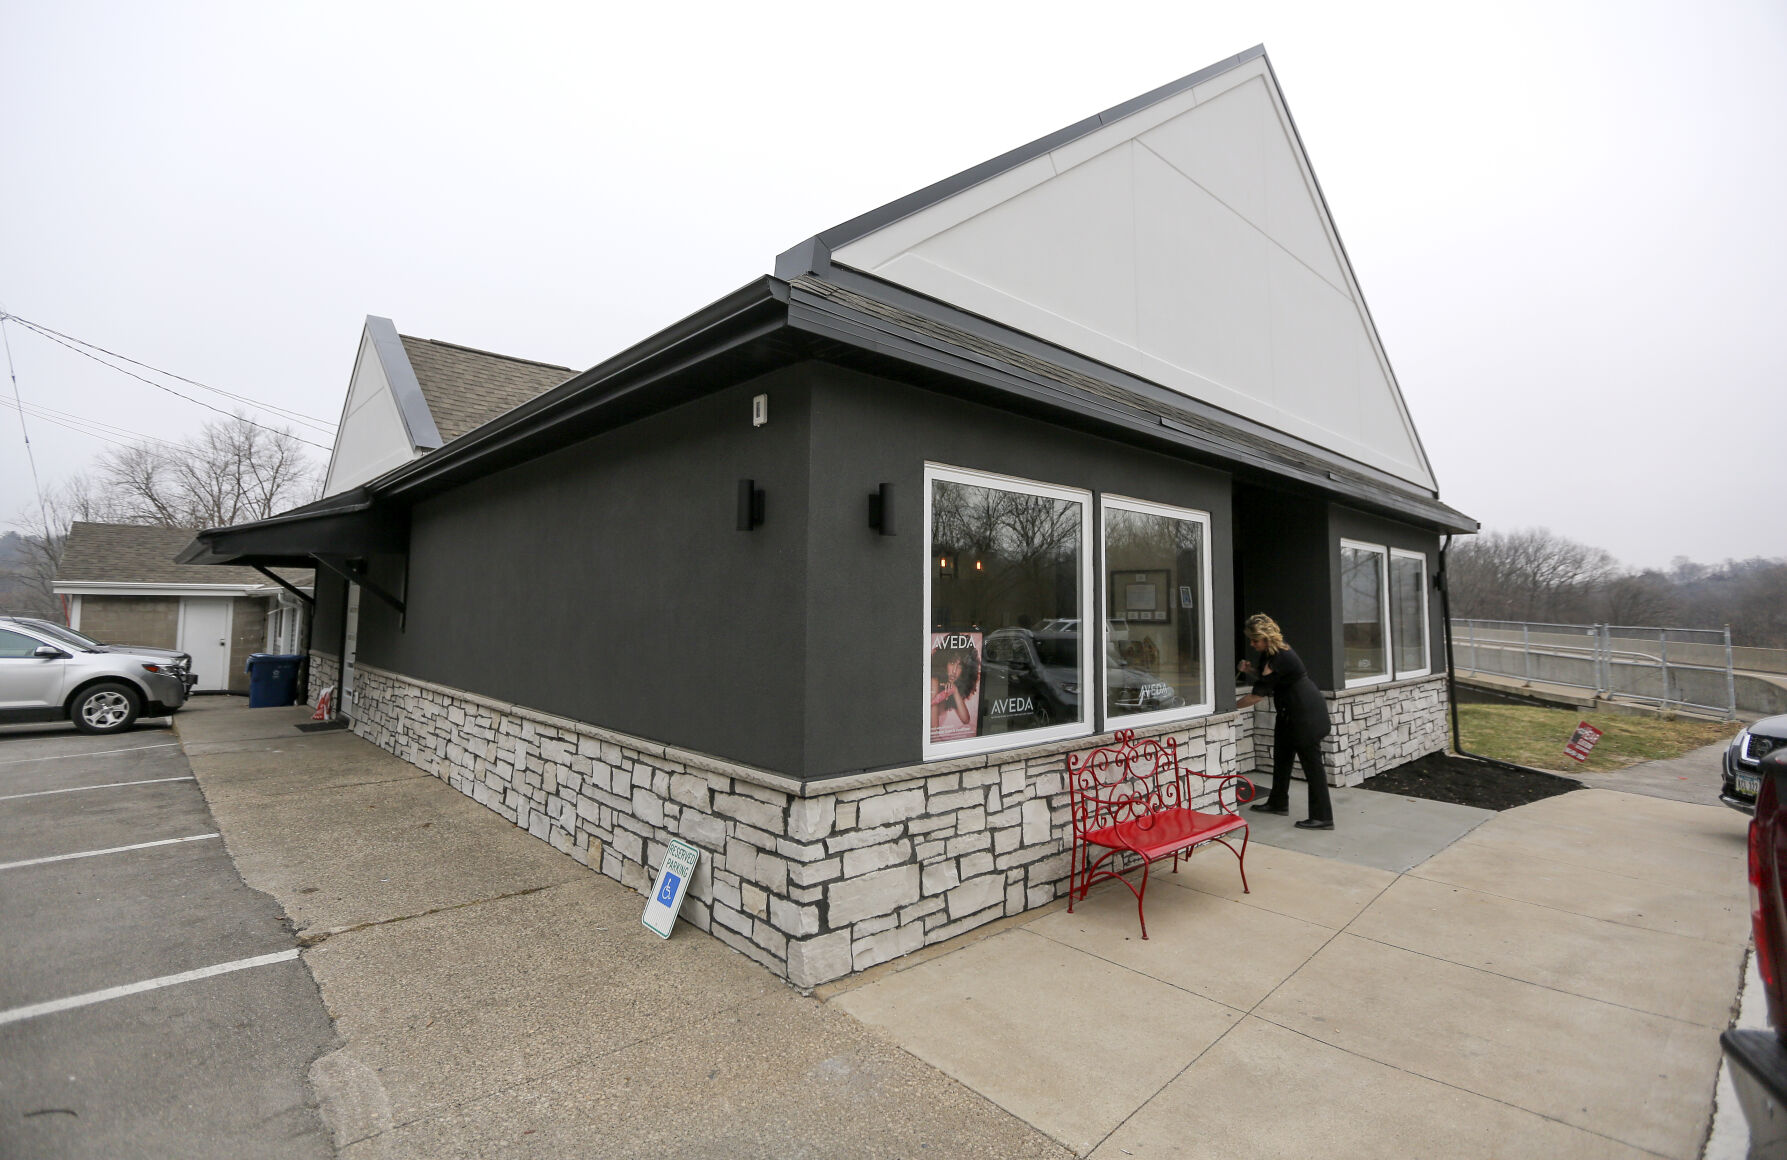 The Meraki Salon and Spa and Extension Bar is located on Rockdale Road in Dubuque.    PHOTO CREDIT: Dave Kettering